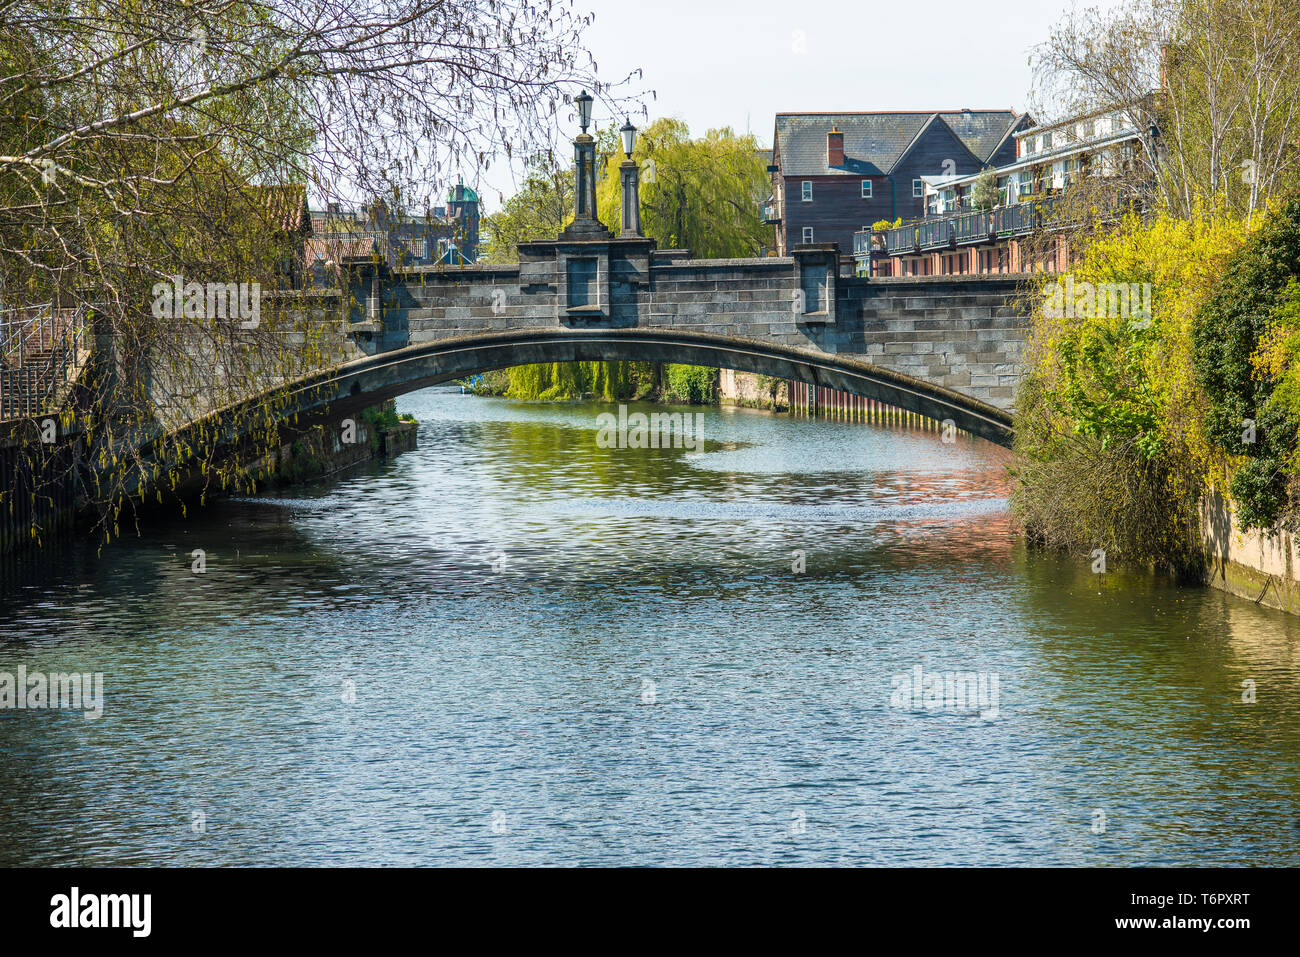 The River Wensum and Whitefriars Bridge in Norwich, Norfolk, United Kingdom. Stock Photo